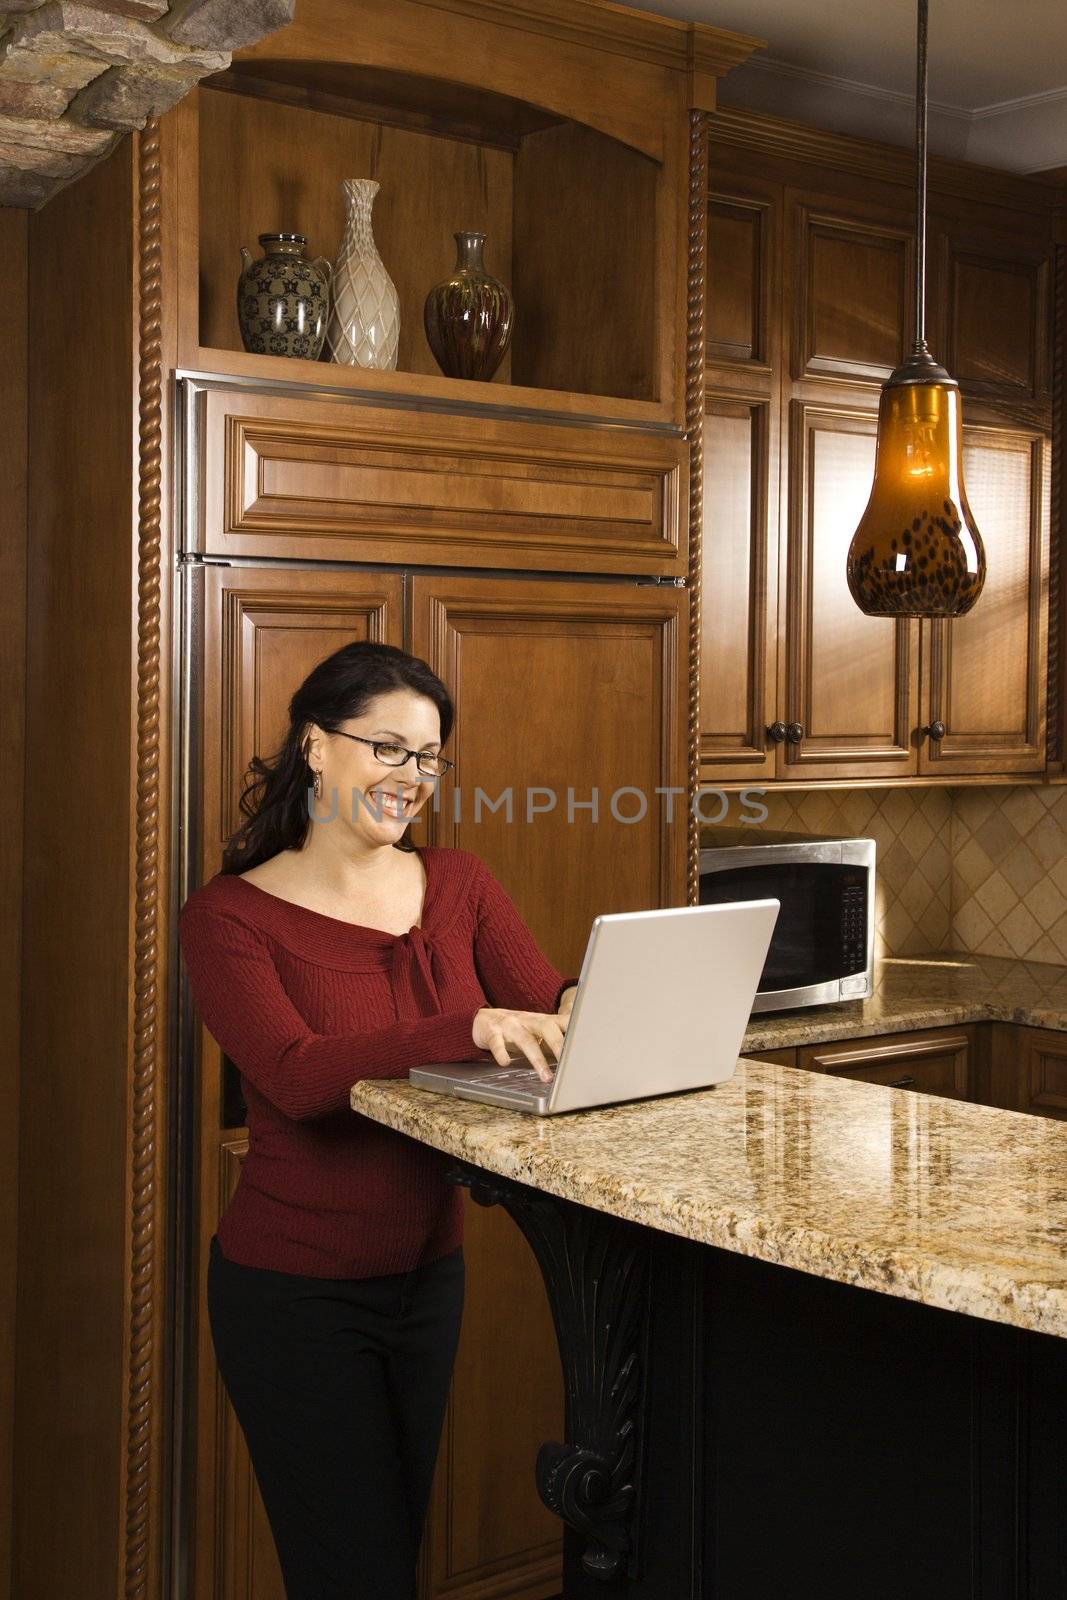 Caucasian woman standing at kitchen counter typing on laptop computer and smiling.